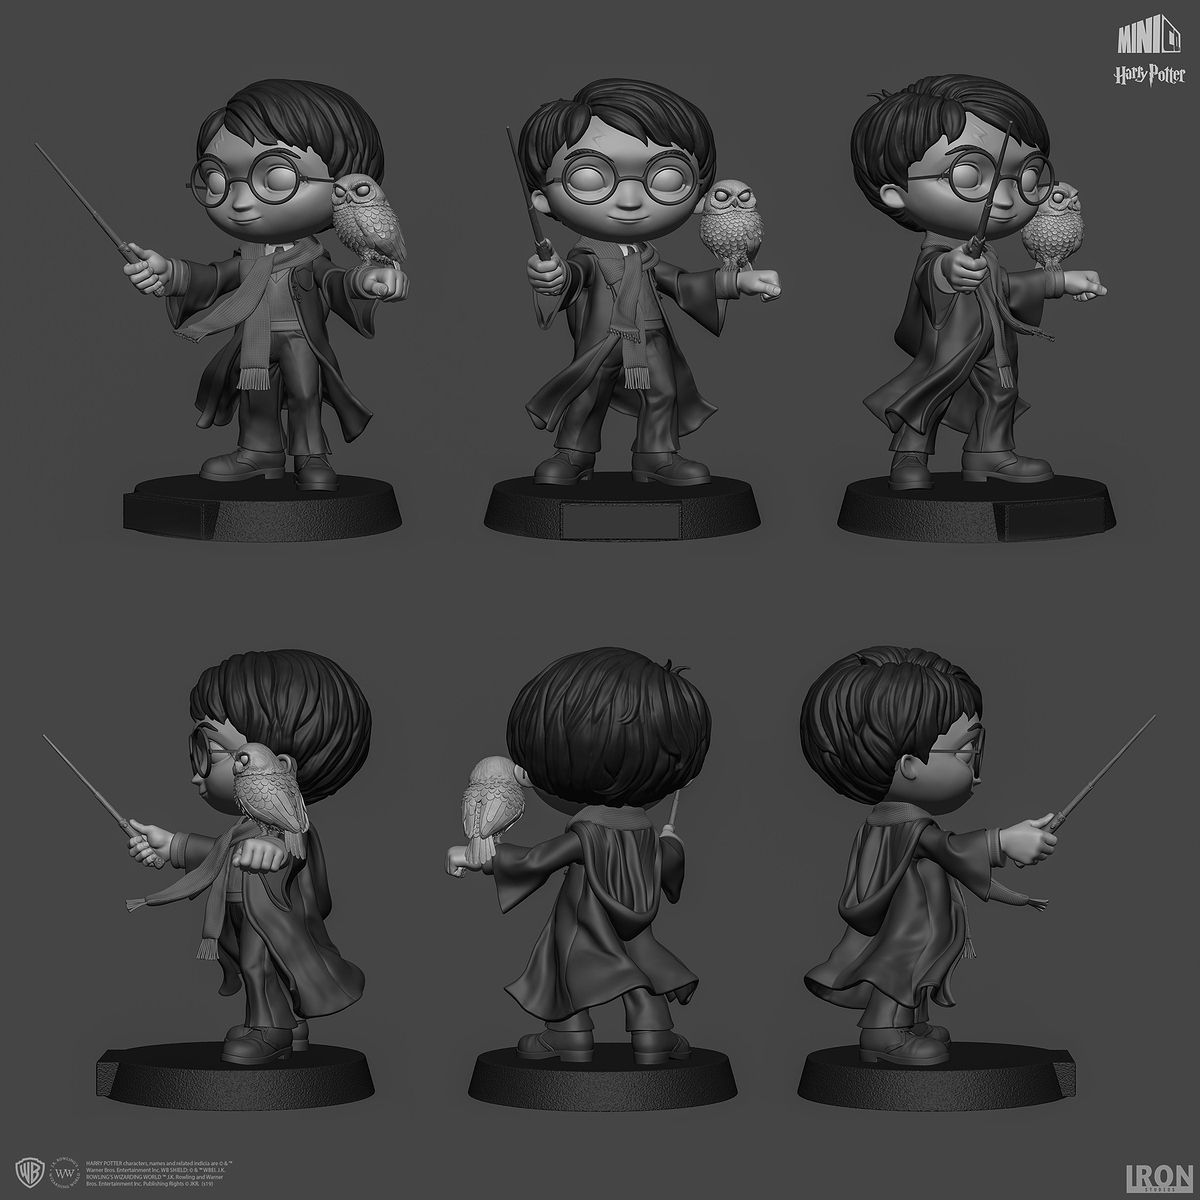 HarryPotter_Turntable_Zbrush_01